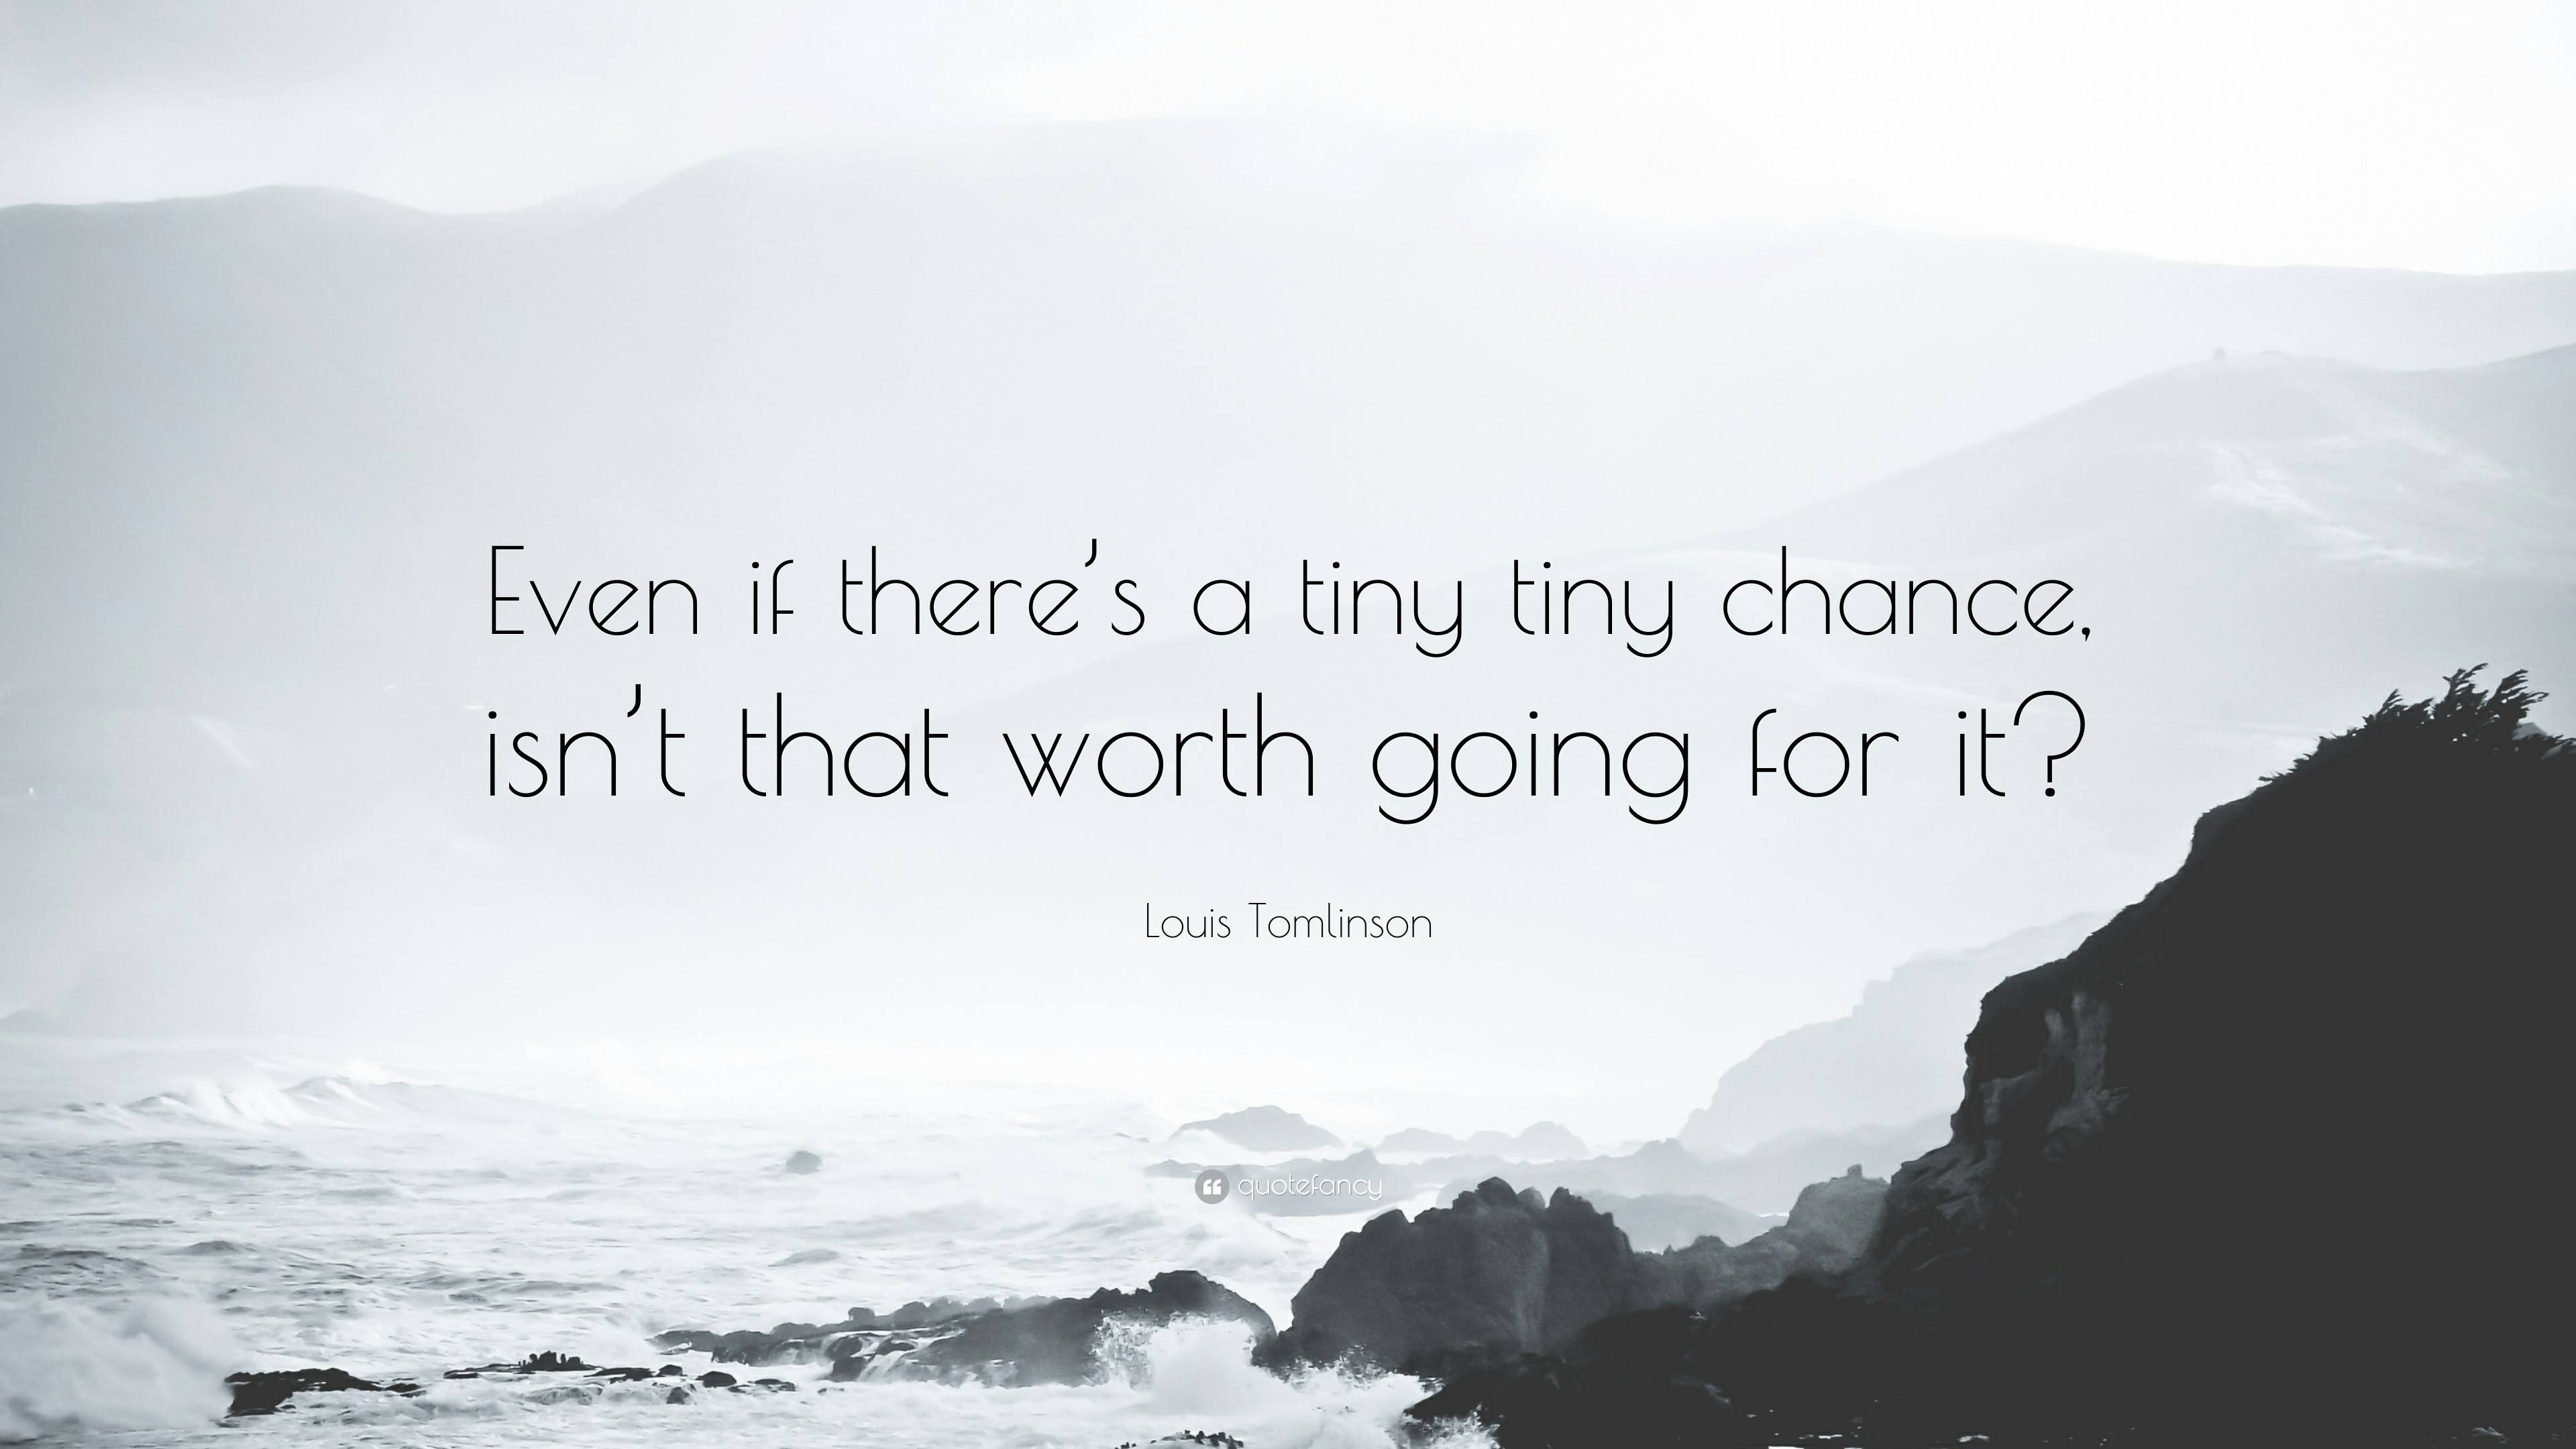 3840x2160 Louis Tomlinson Quote: “Even if there's a tiny tiny chance, isn't